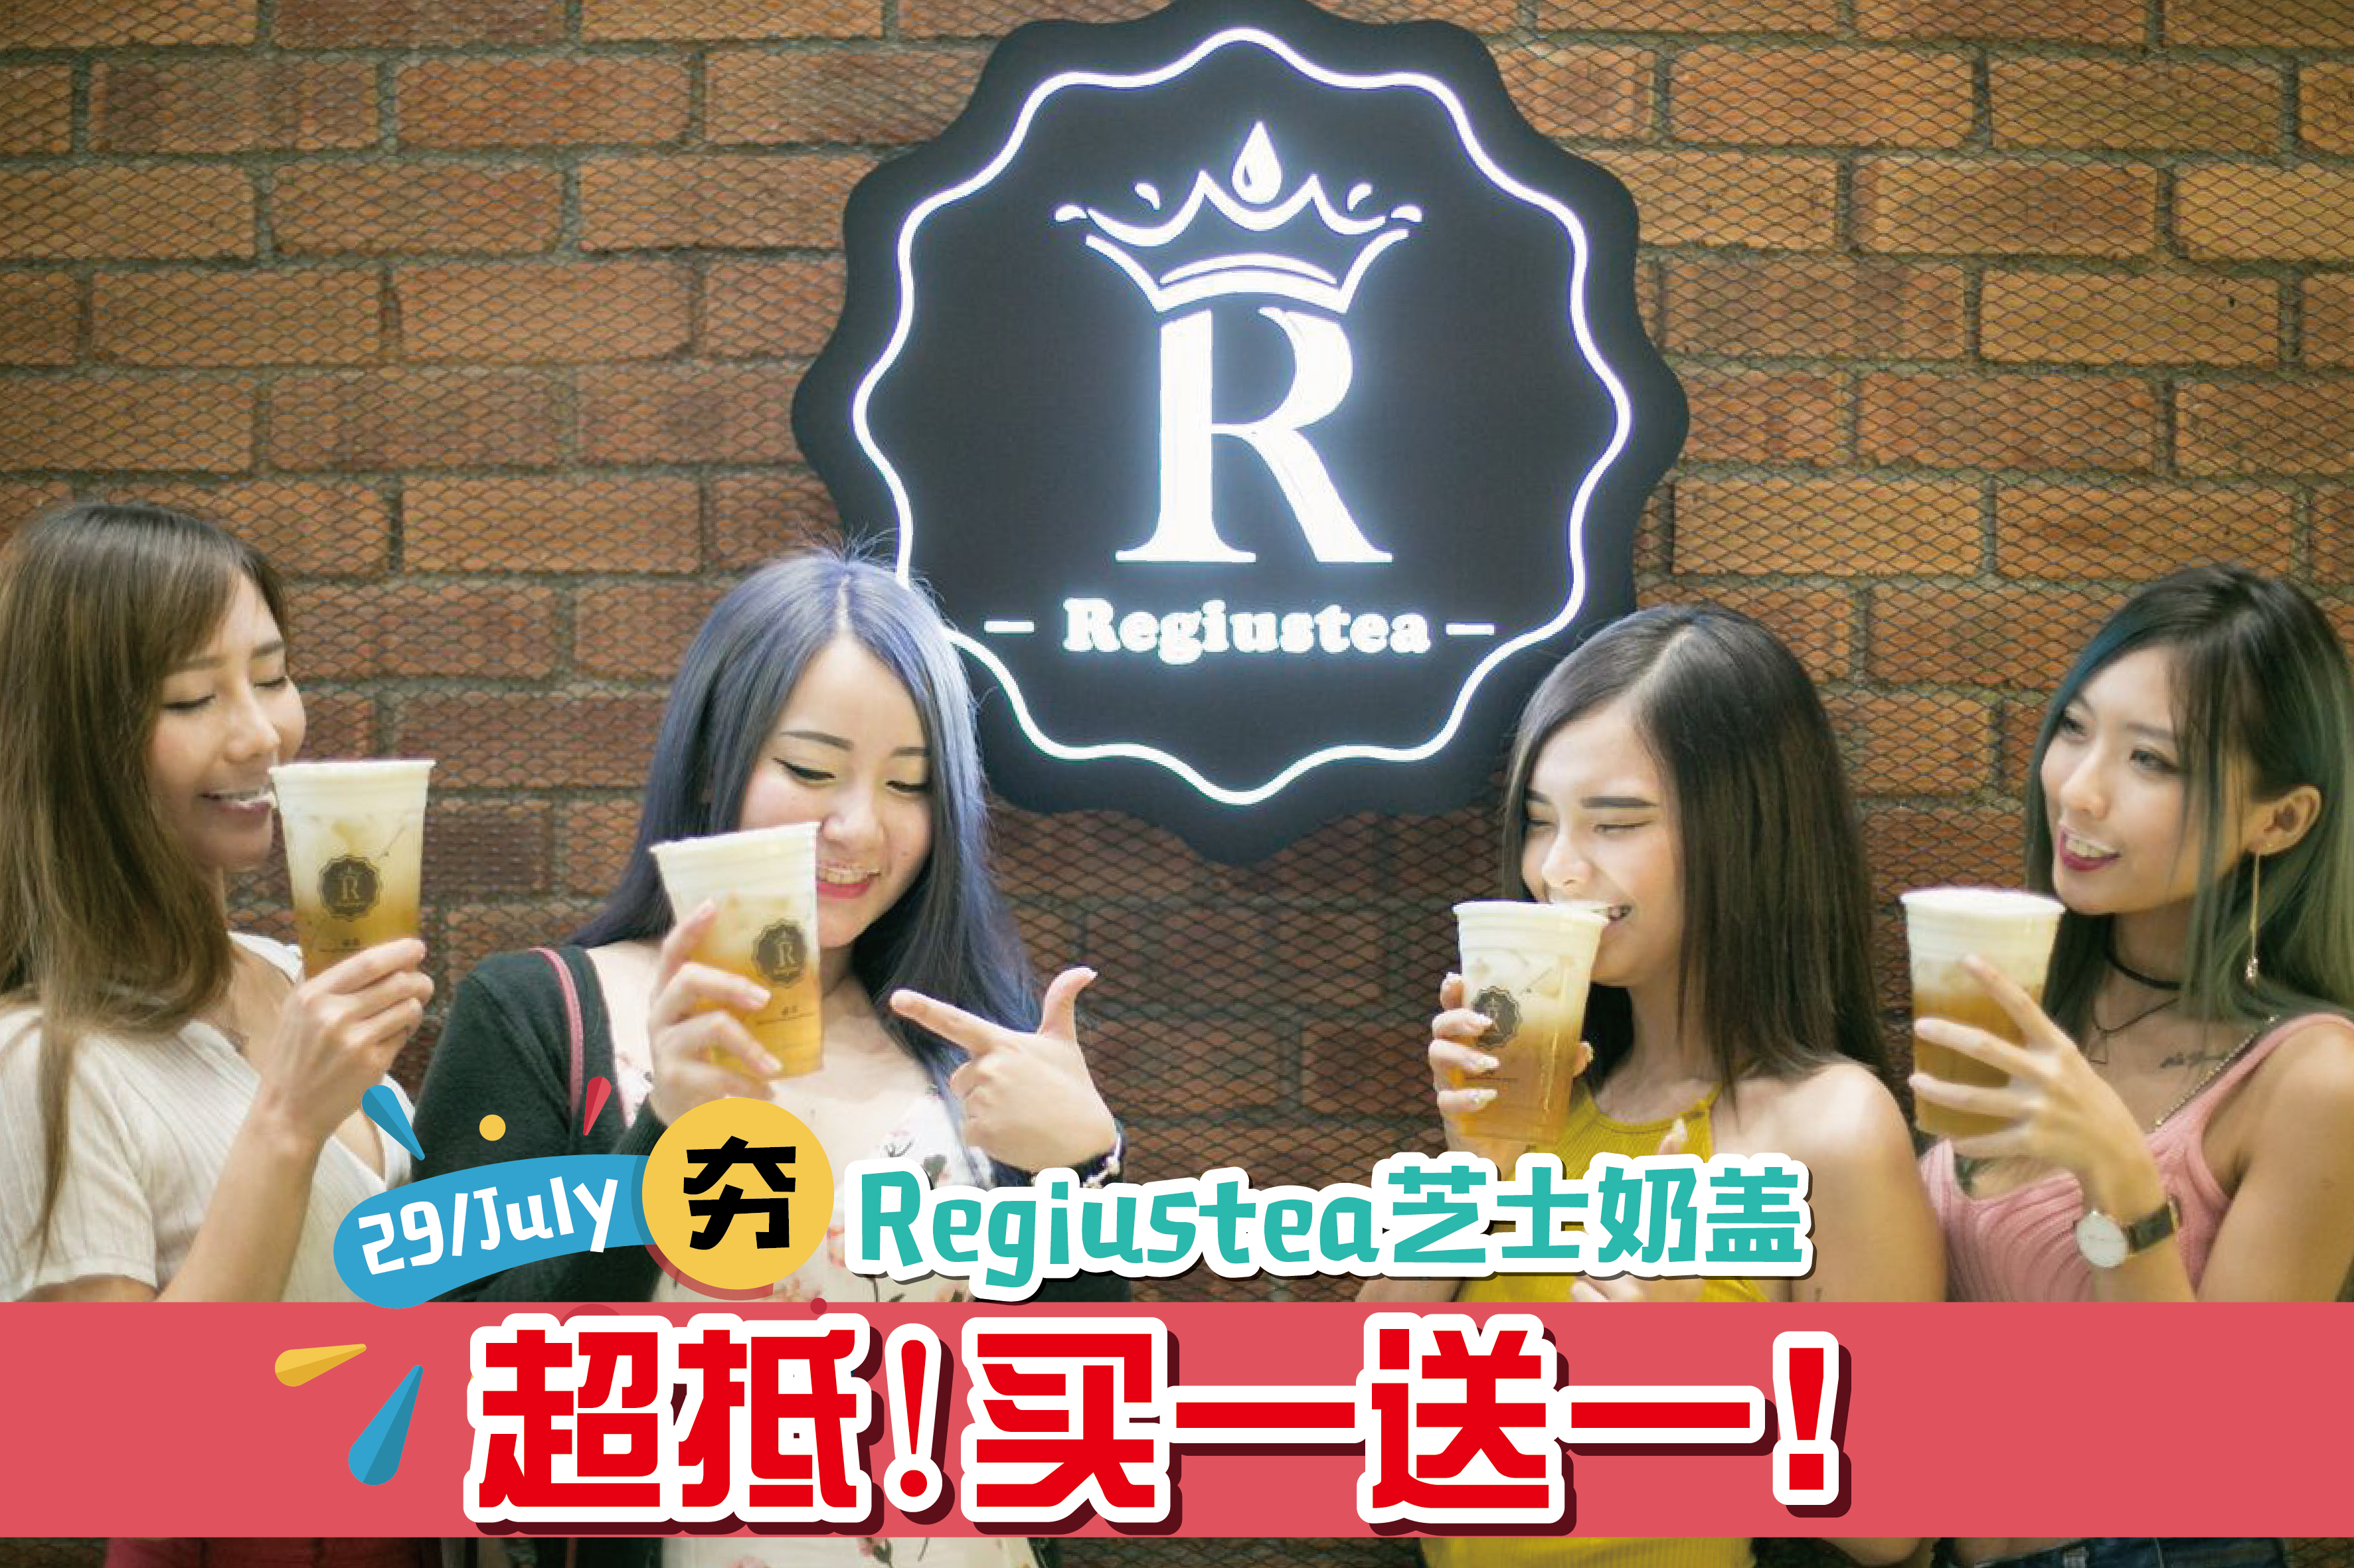 Regiustea – Grand Opening at Queensbay Mall on July 29, 2017